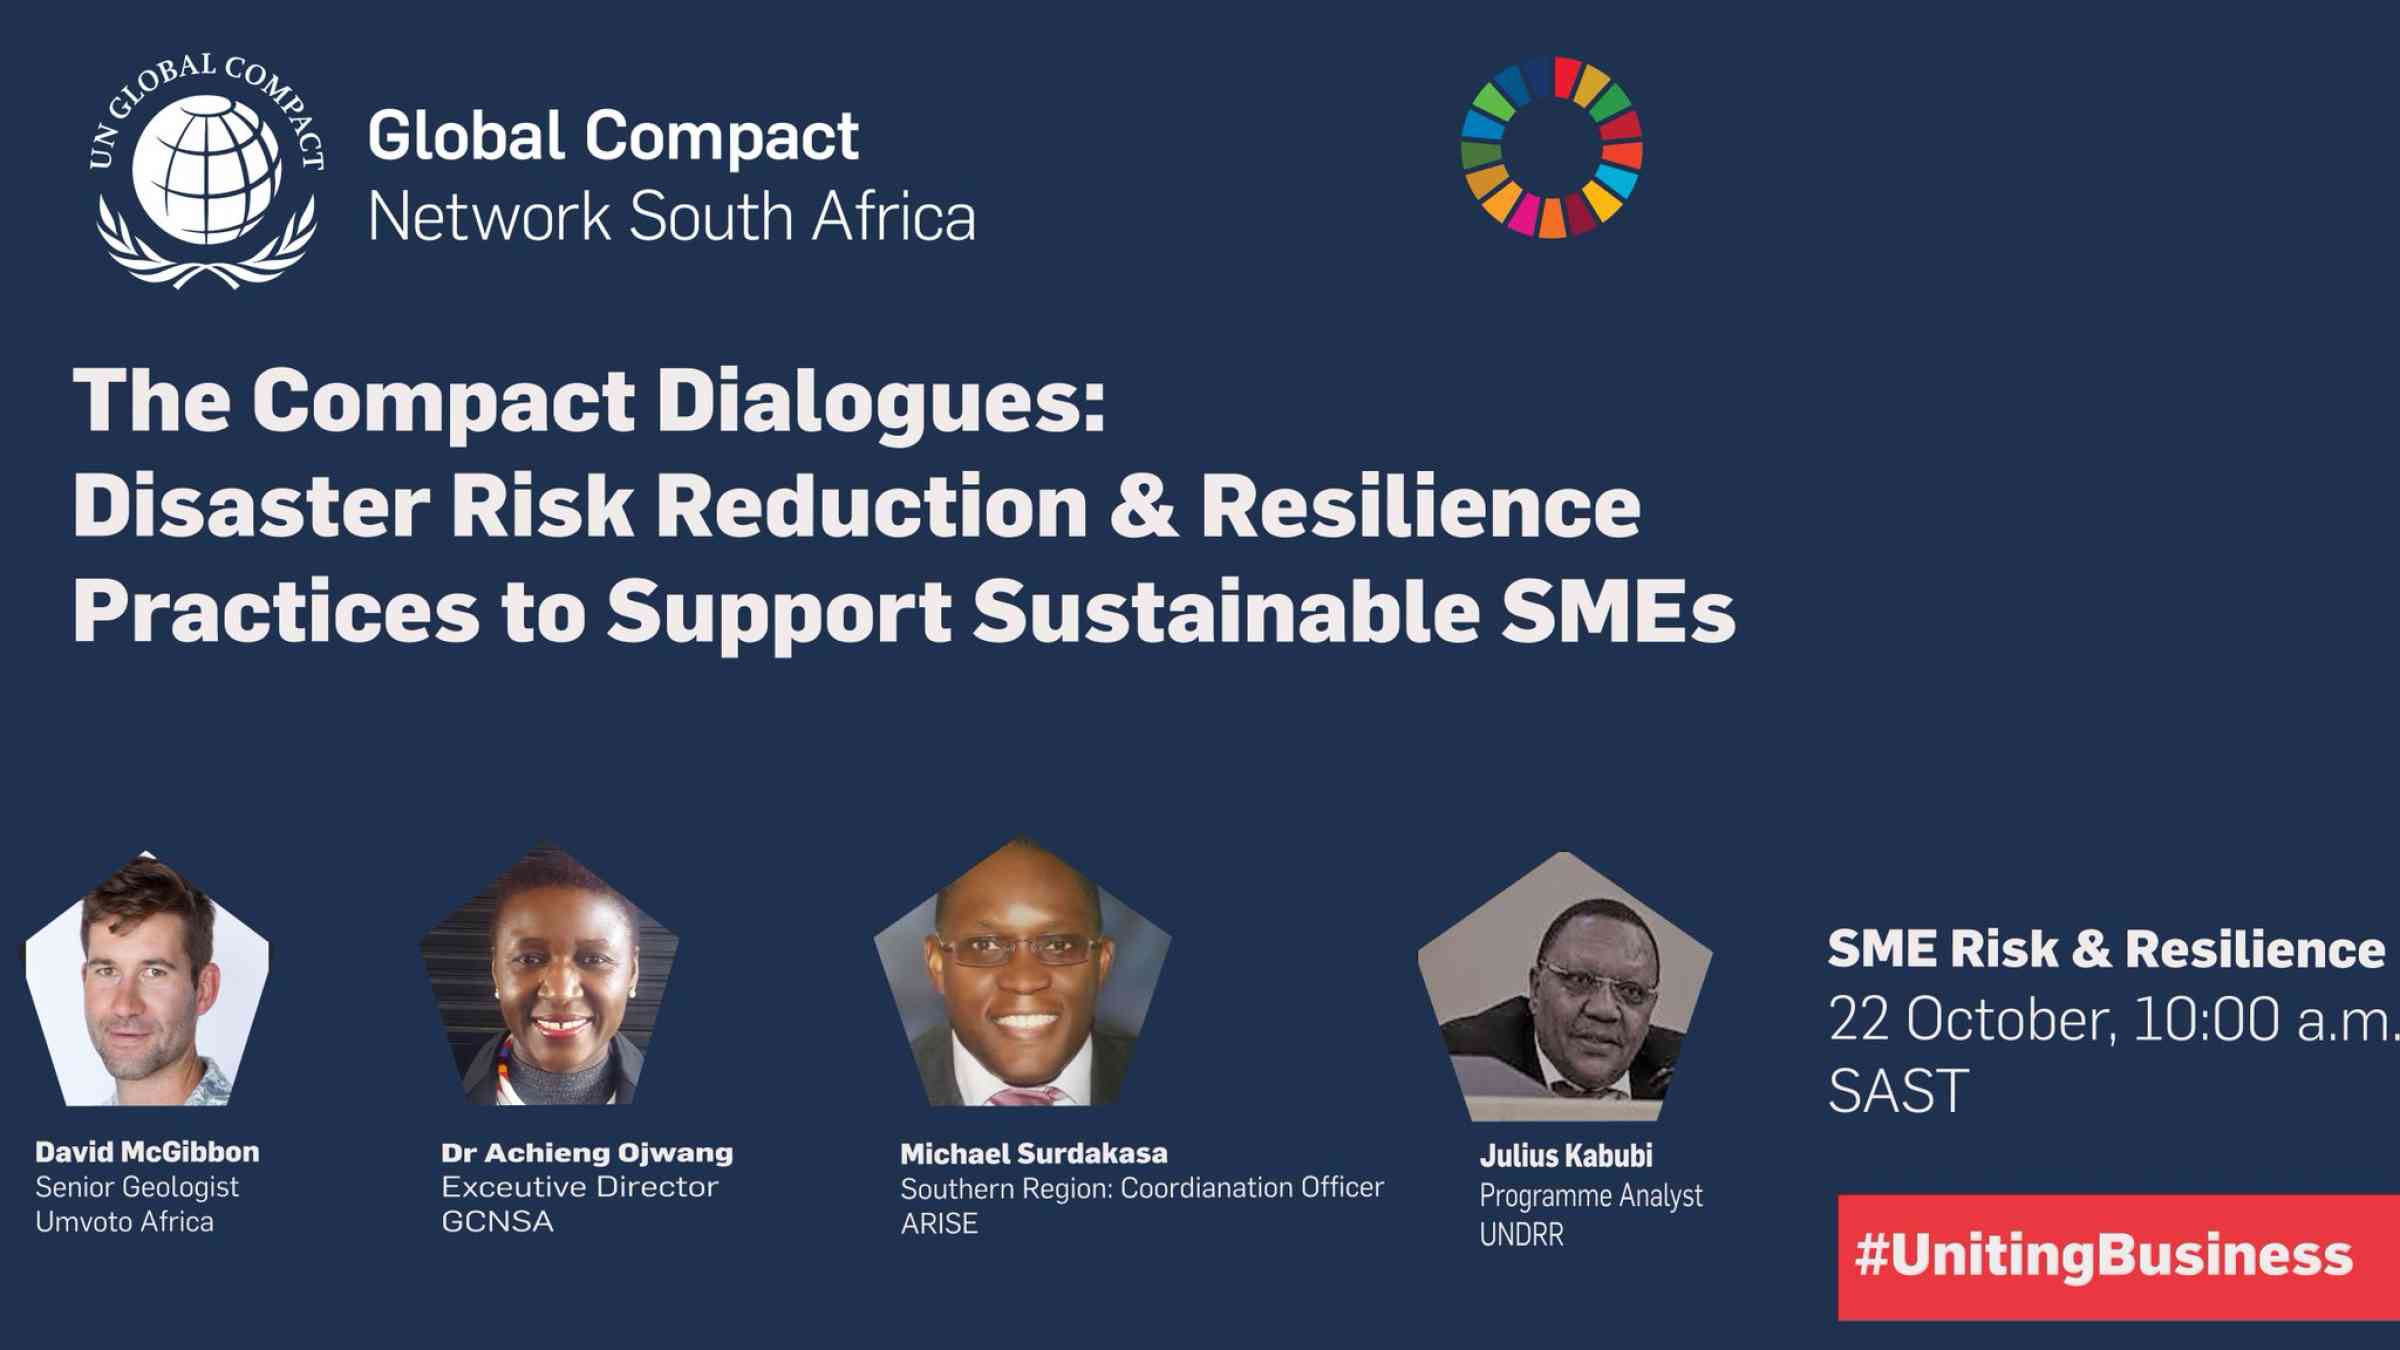 The Compact Dialogues: Disaster Risk Reduction & Resilience Practices to Support Sustainable SMEs